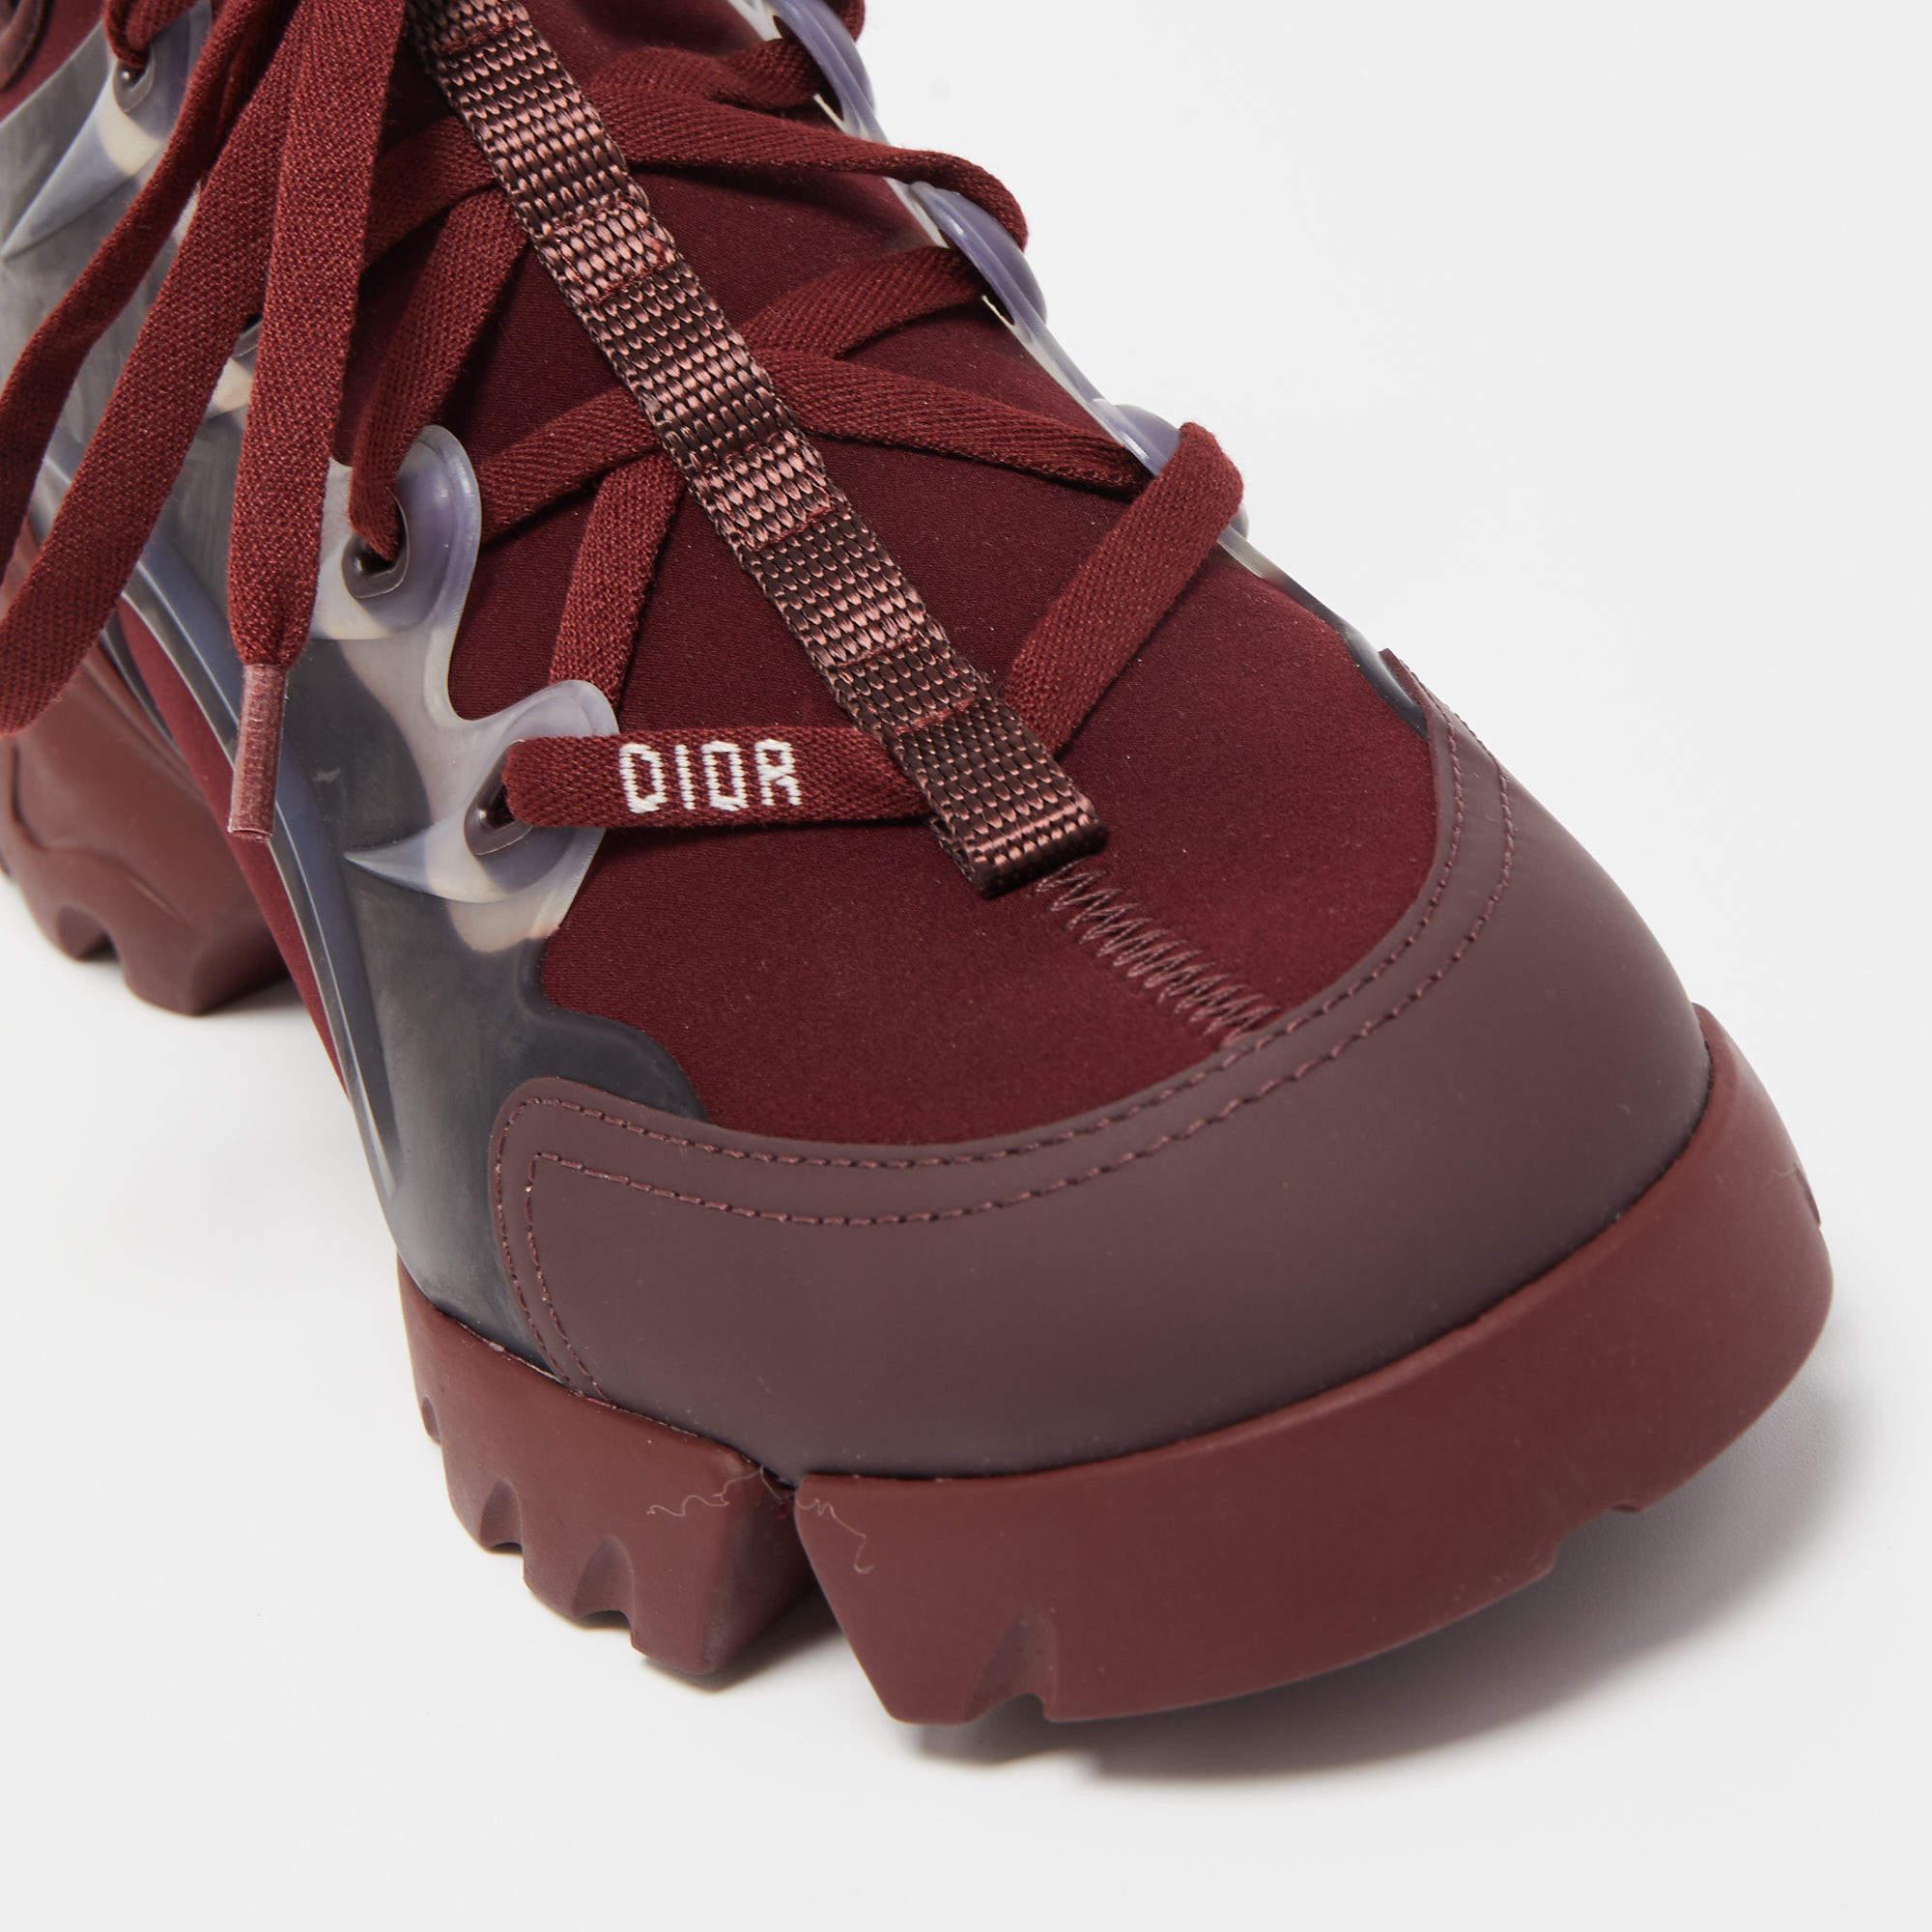 The Dior D-Connect sneakers are a stylish footwear choice. These sneakers feature a blend of burgundy PVC and fabric materials, providing durability and a unique aesthetic. With the iconic chunky shape, they offer a fashionable and comfortable